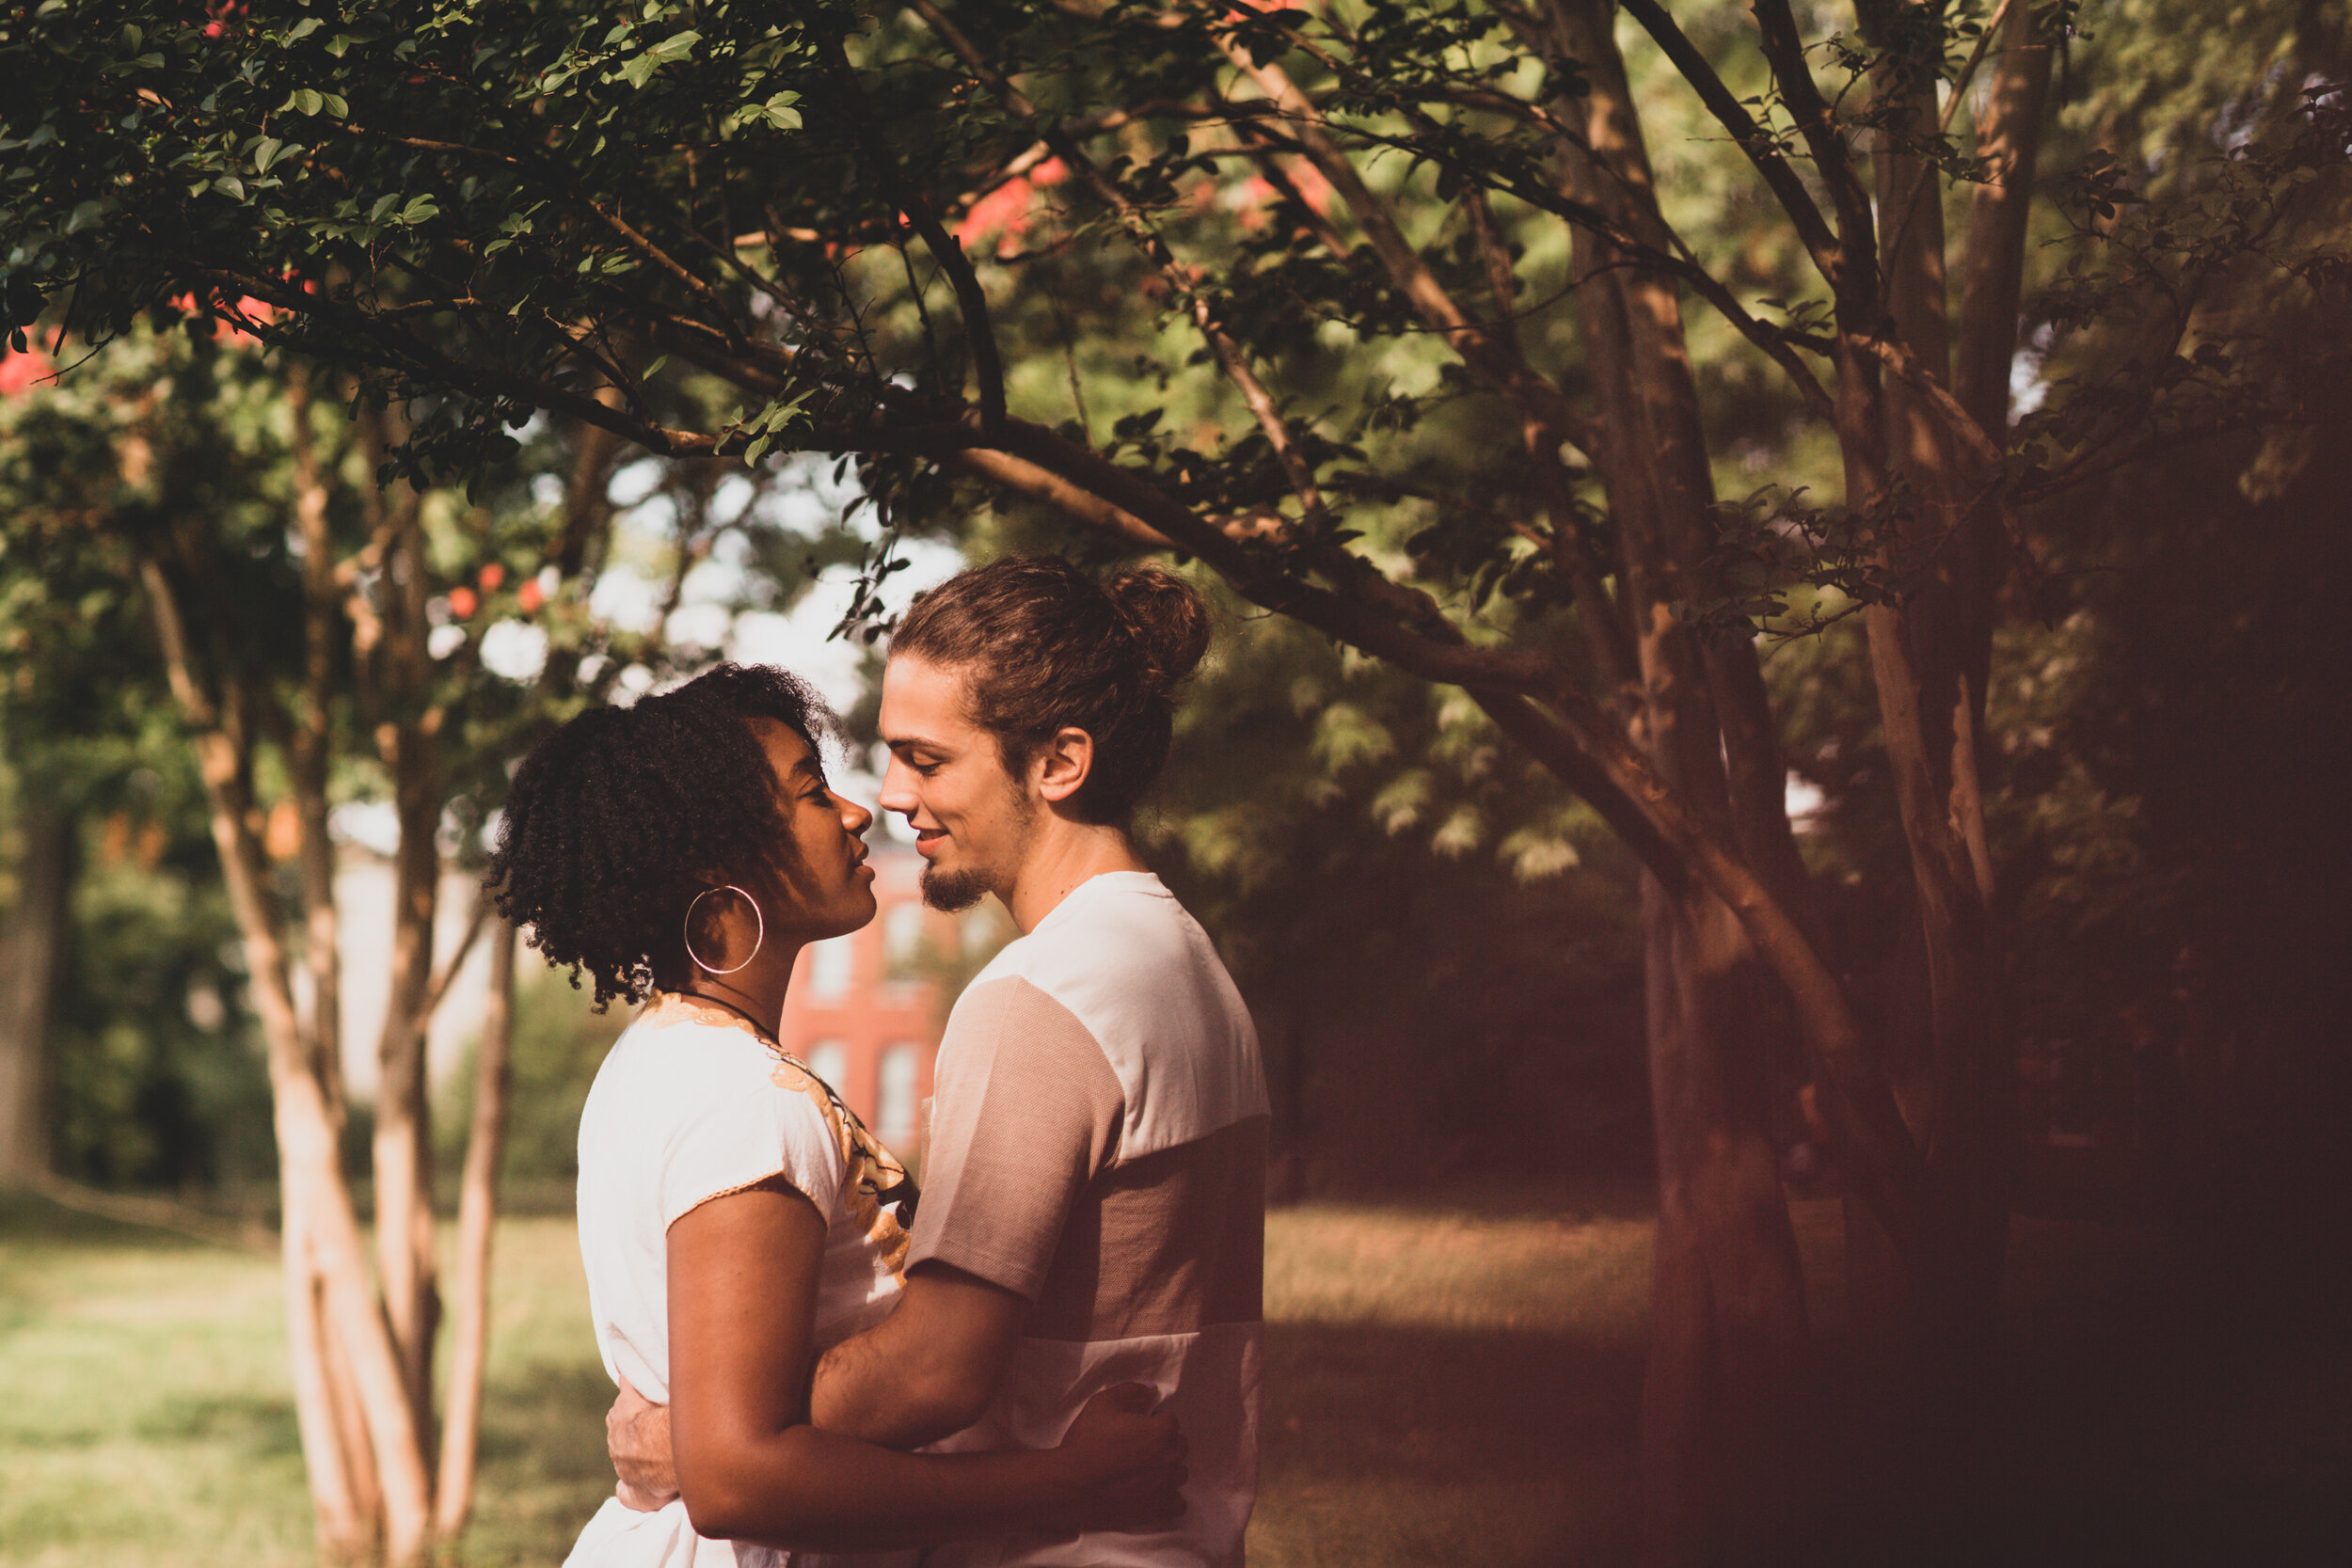 Golden Hour Engagement Session in Baltimore Maryland Patterson Park Pagoda DC Wedding Photographers Megapixels Media Photography and Videography Mixed Couple Multiracial Bride and Groom-40.jpg